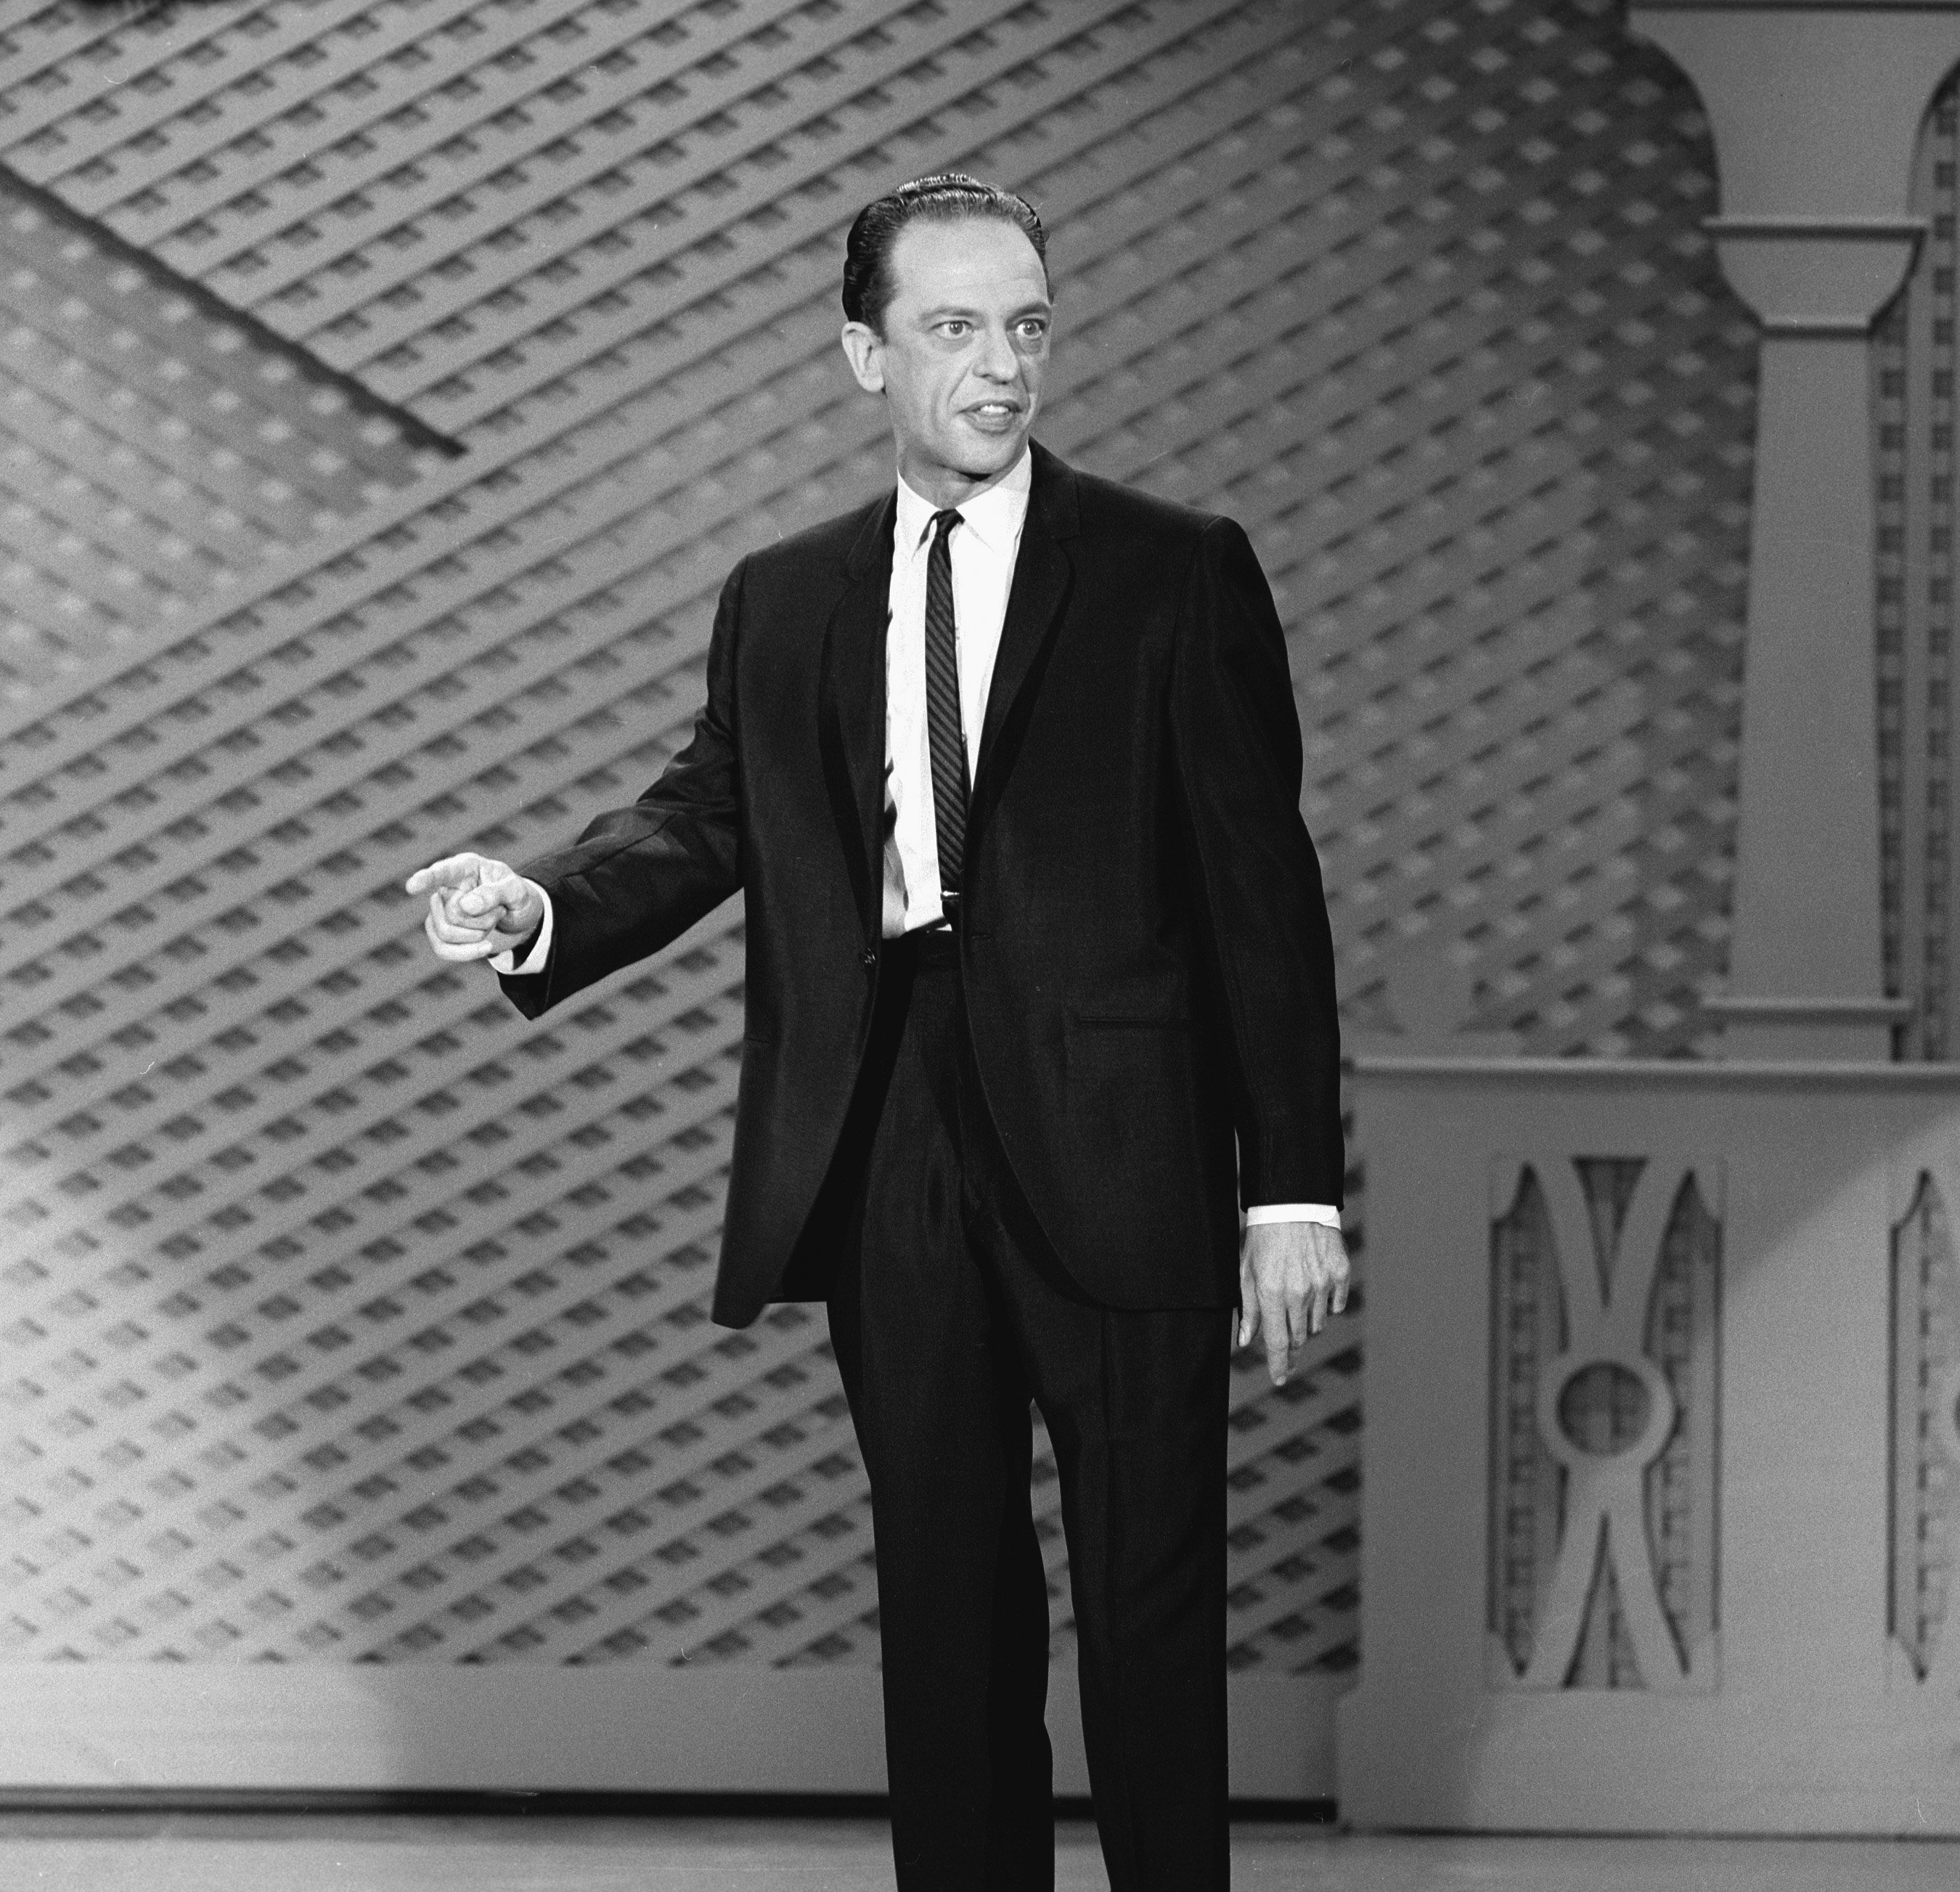 Television actor Don Knotts dressed in a suit and tie addressing an audience, 1965